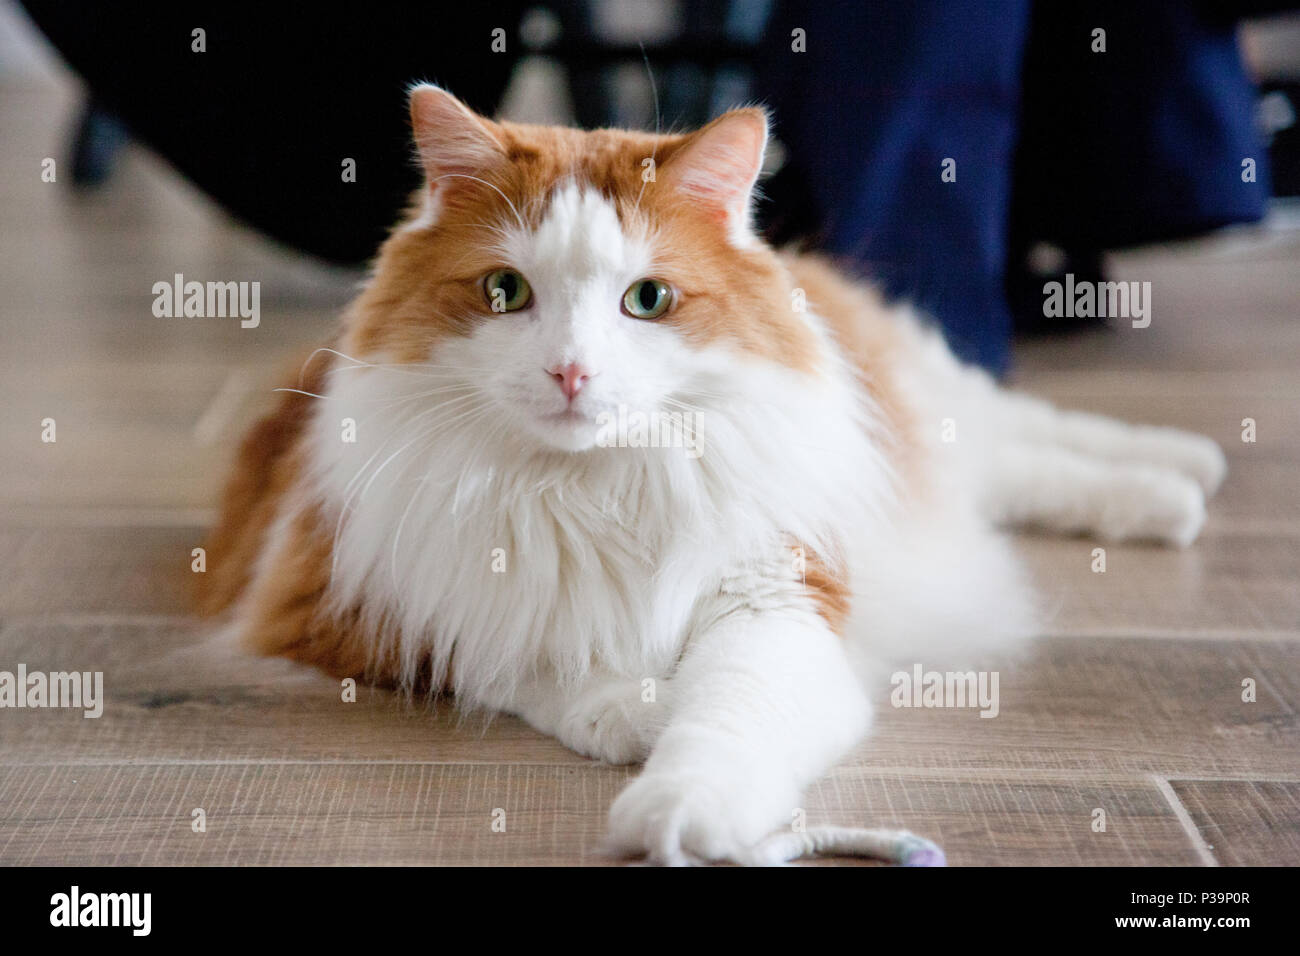 A beautiful white and orange cat laying on the floor staring at the camera Stock Photo